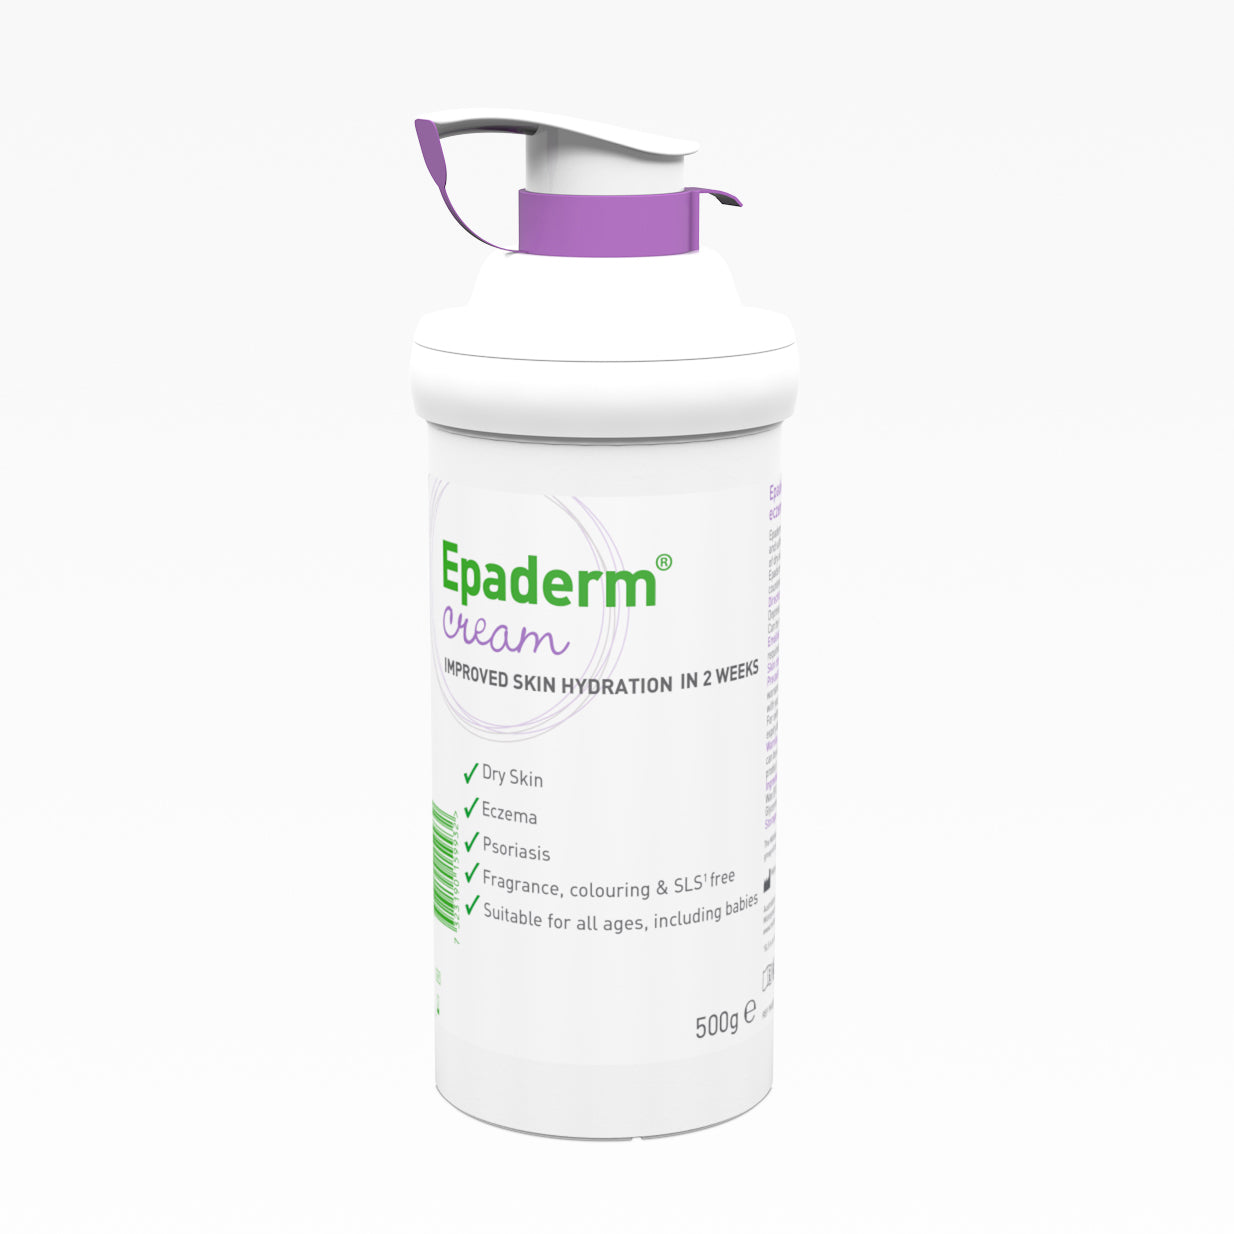 Epaderm Cream is a 2-in-1 emollient and cleanser clinically proven to effectively relieve the symptoms of dry skin, including hydration and smoothness, after just two weeksRecommended by Doctors Non-greasy formulation absorbs into the skin Suitable for all ages, including babies Free from fragrance, colouring and SLS Easy to use 'twist and lock' pump dispensers Available in 50g and 500g recyclable packs